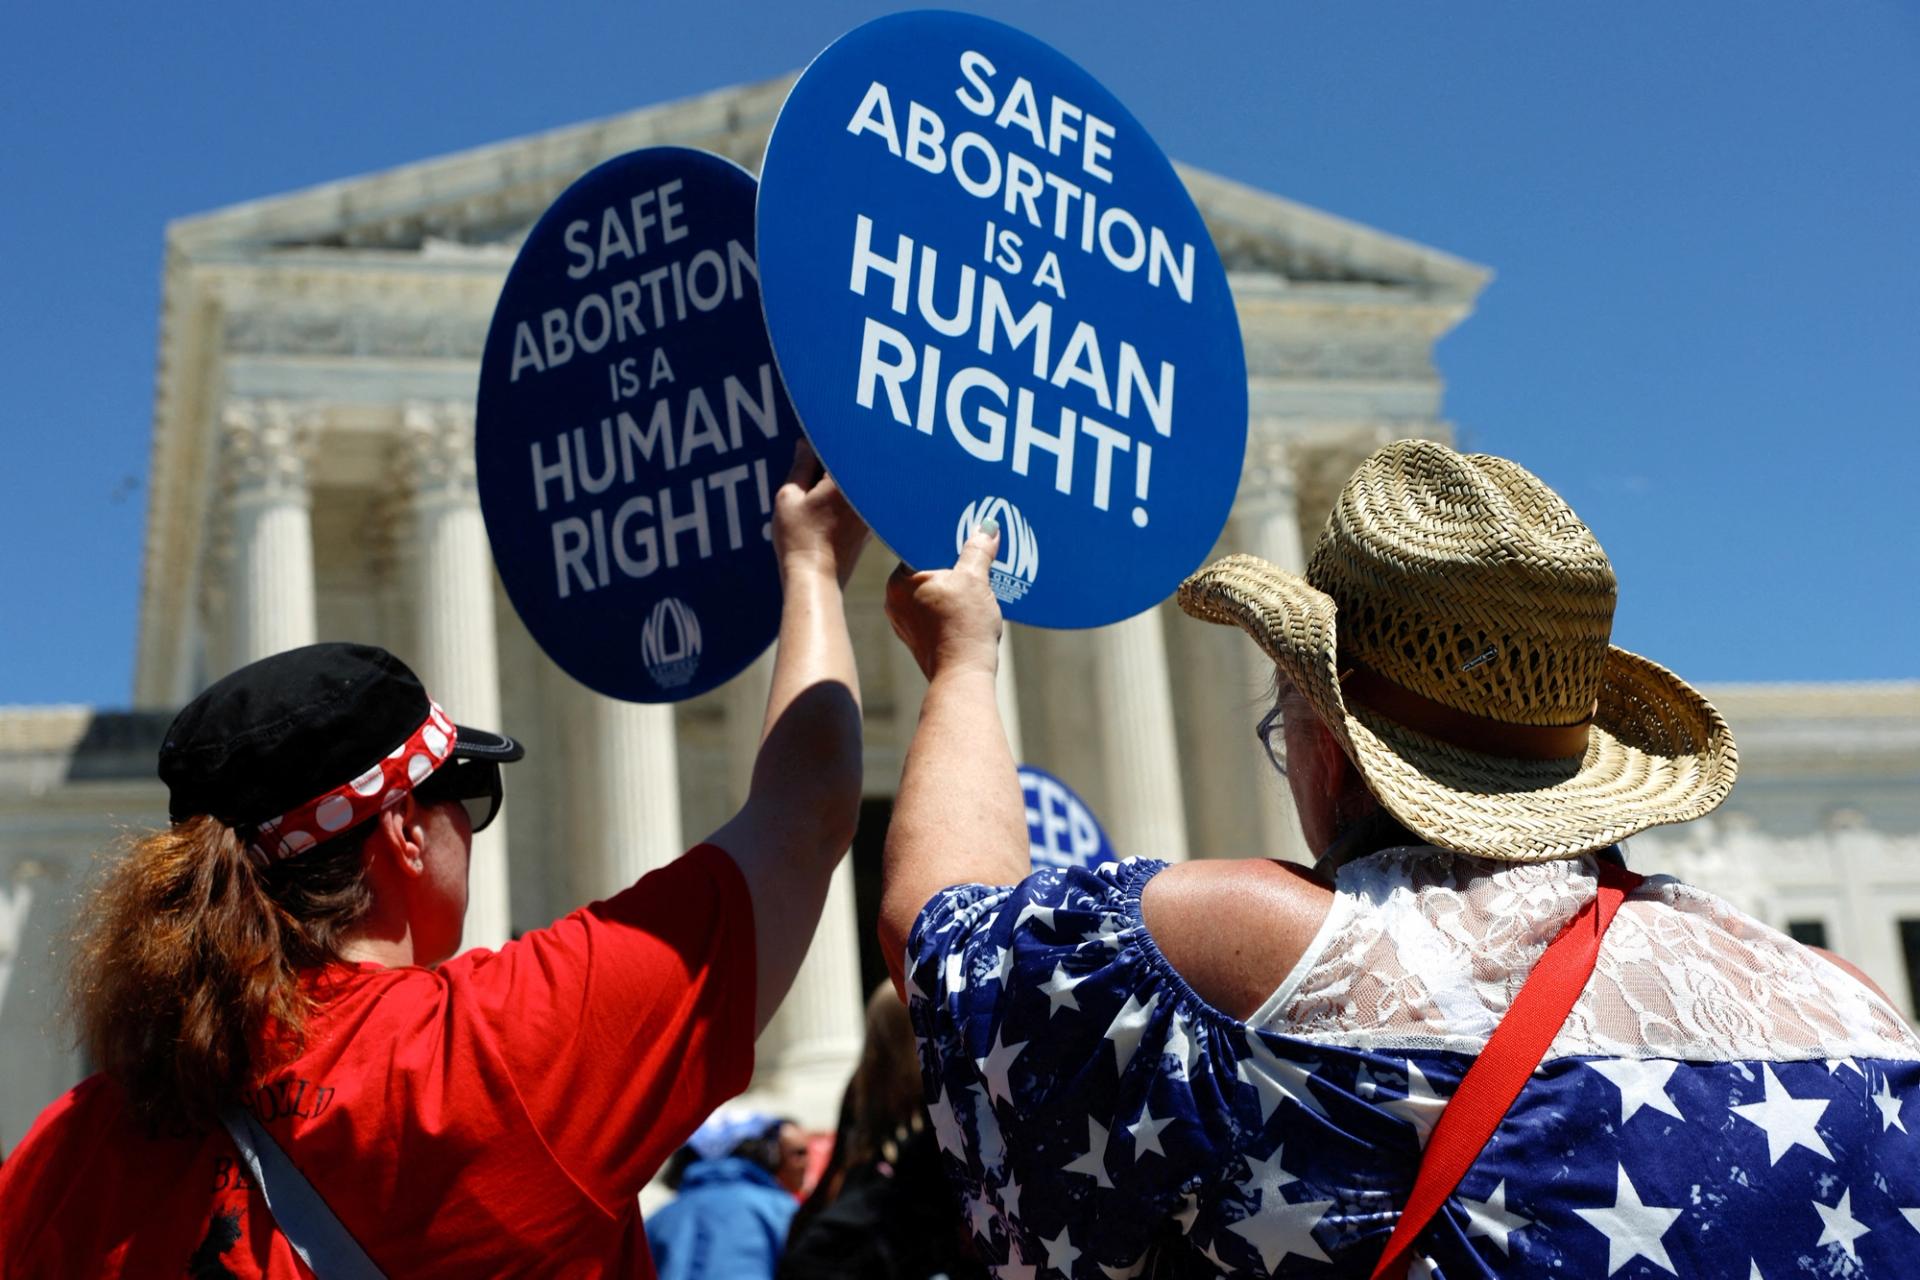 Abortion rights activists hold signs as they gather at the U.S. Supreme Court to mark the second anniversary of the Court overturning Roe v. Wade.